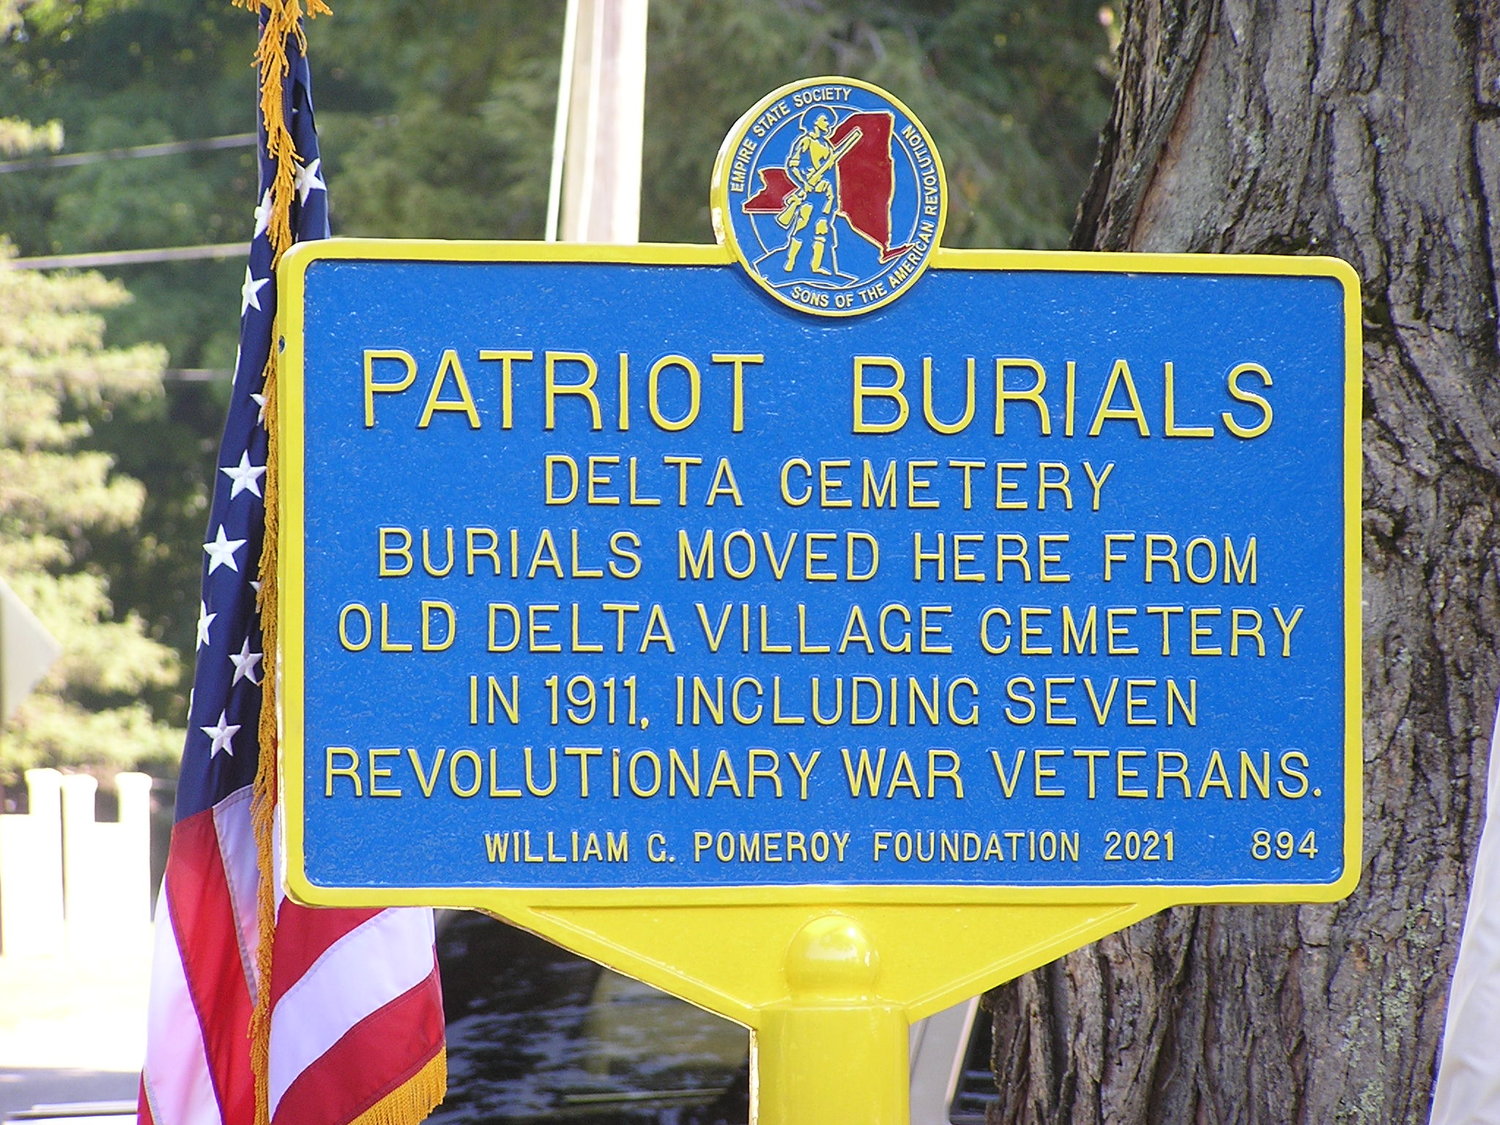 The William G Pomeroy Foundation Patriot Burial Marker to remember seven Revolutionary War patriots buried at Delta Cemetery.